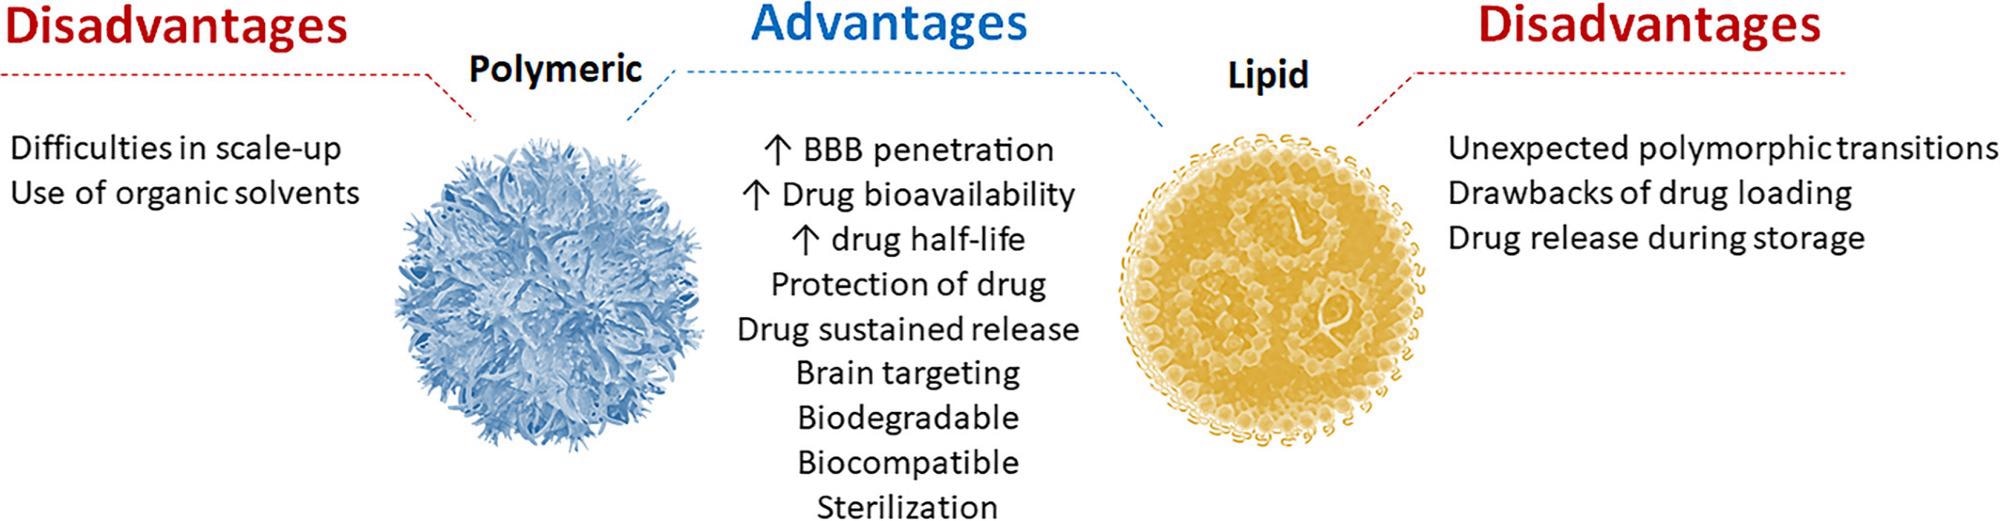 Main advantages and disadvantages of both polymeric and lipid nanoparticles.